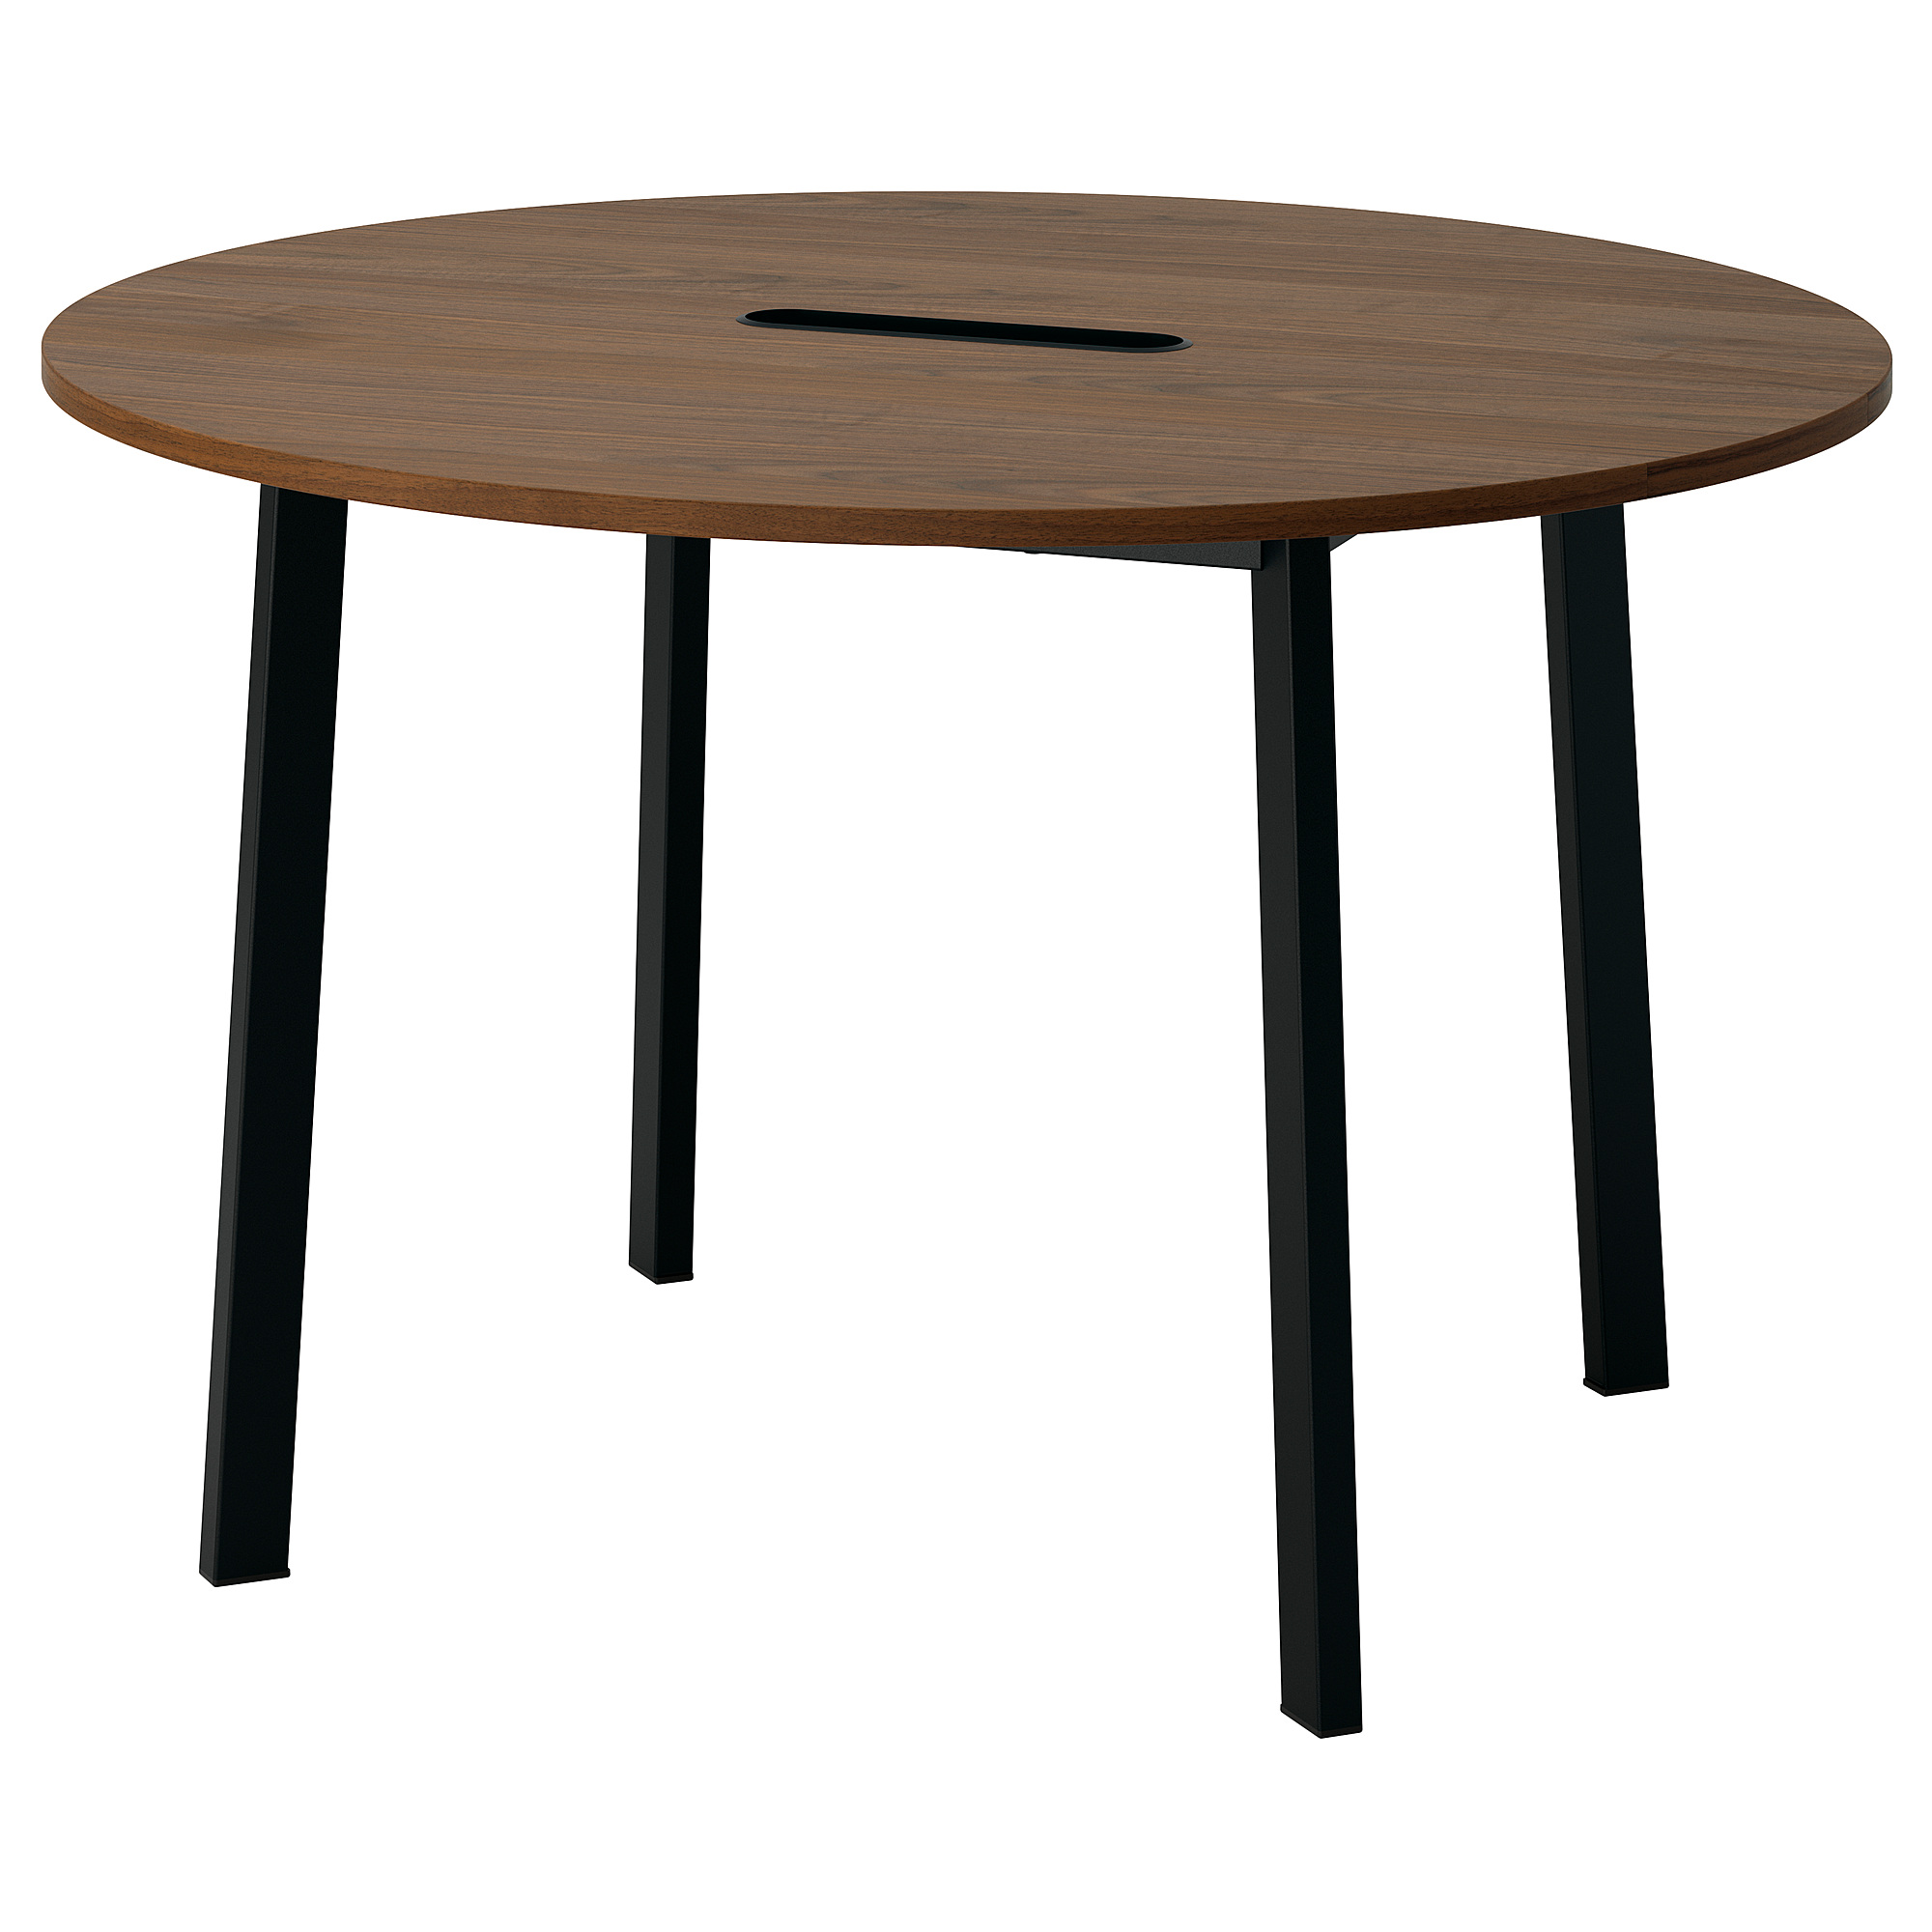 MITTZON conference table